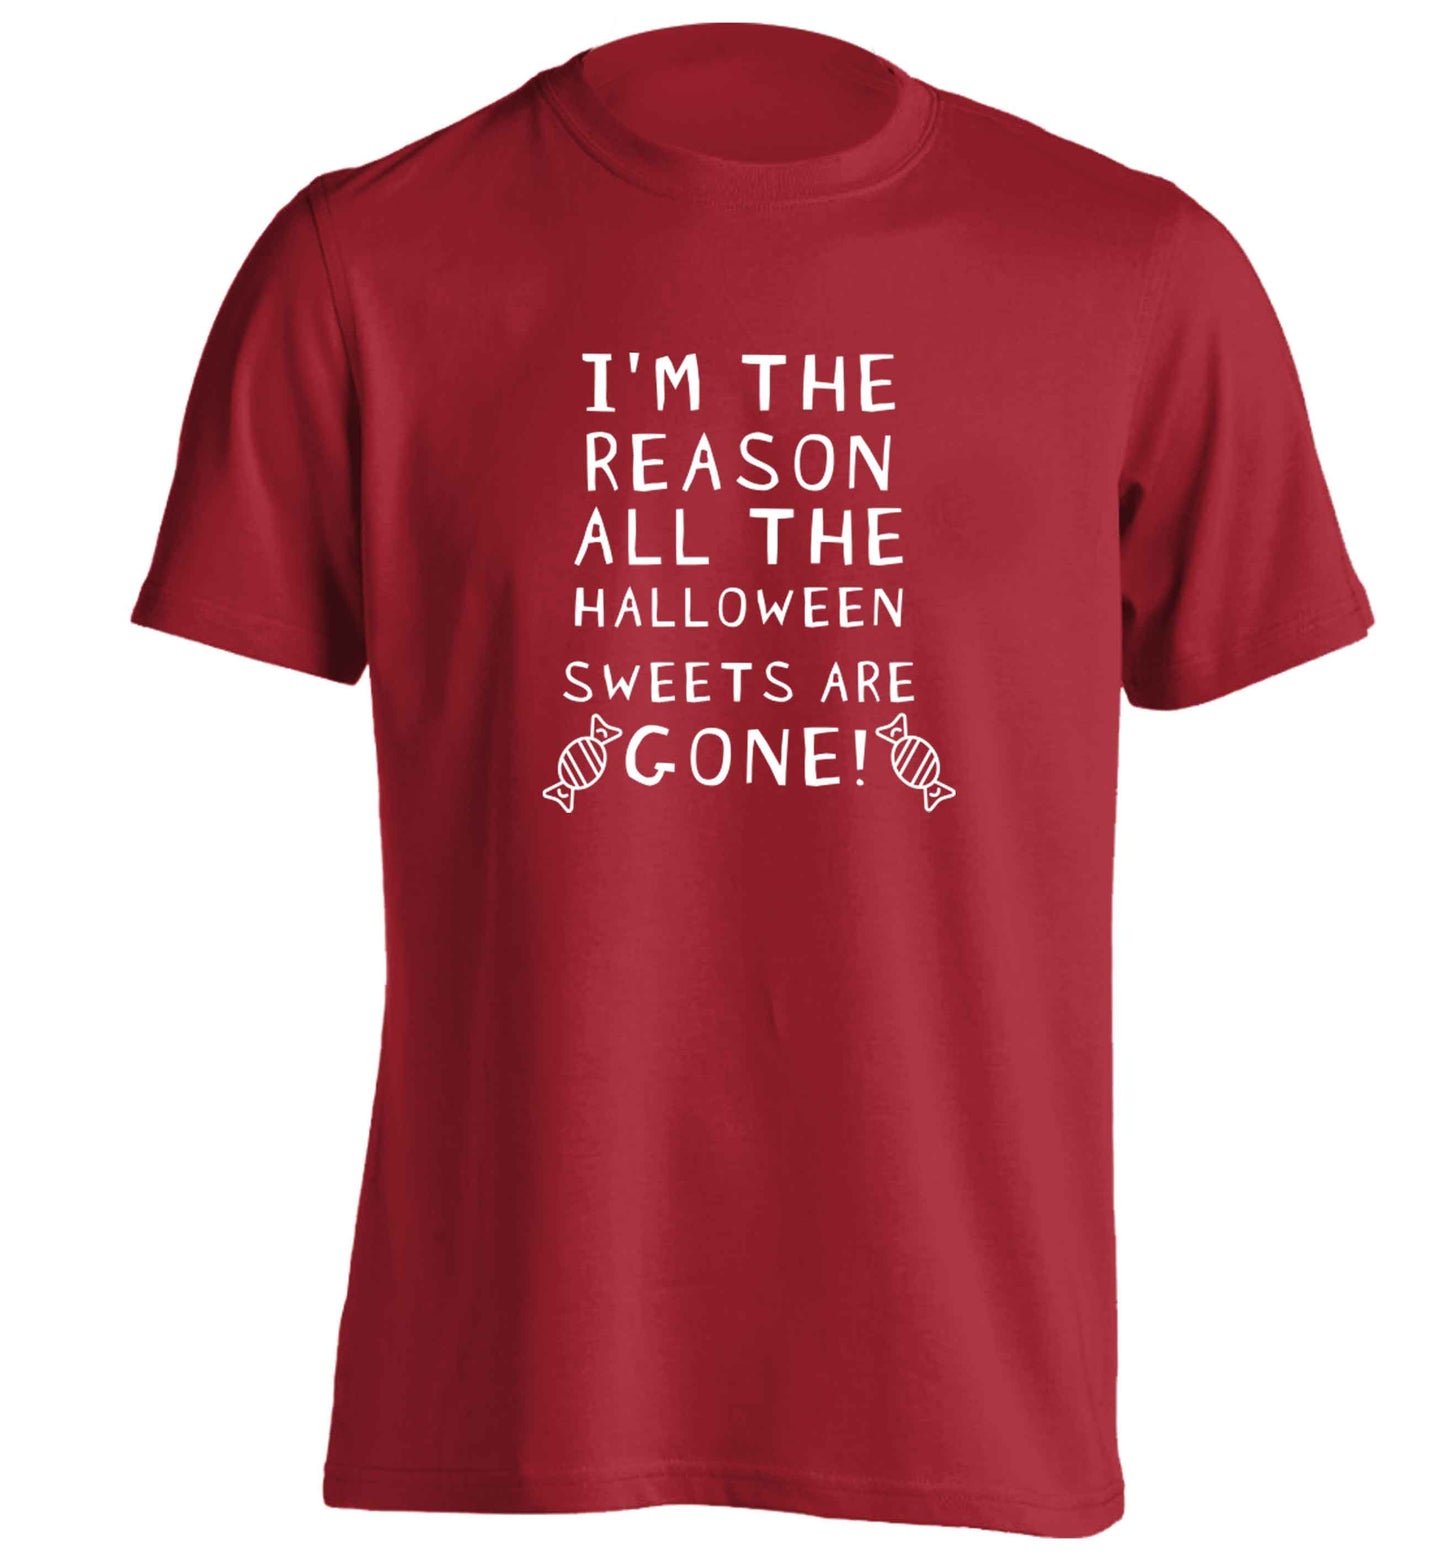 I'm the reason all of the halloween sweets are gone adults unisex red Tshirt 2XL